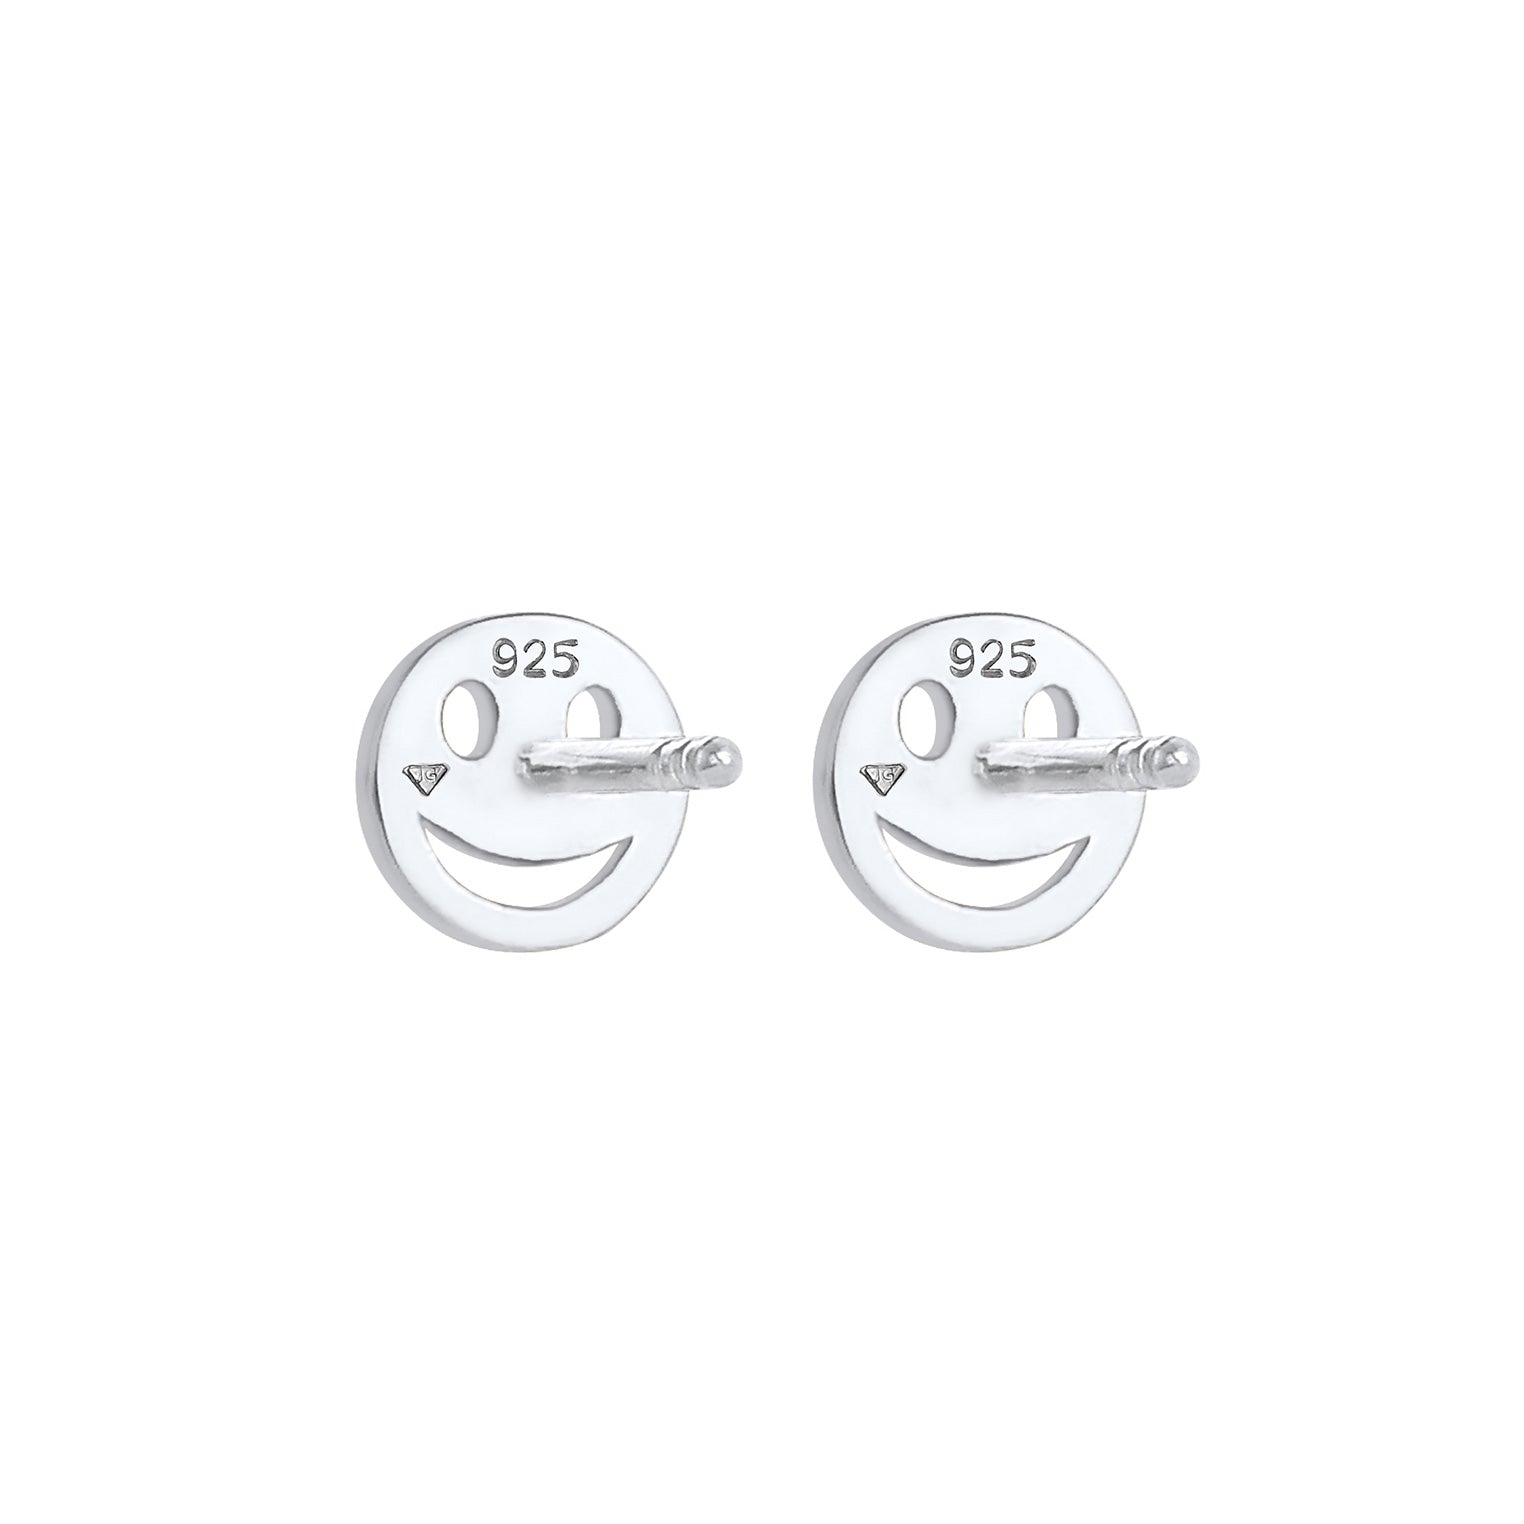 Ohrring mit Smiling Elli – Face Jewelry